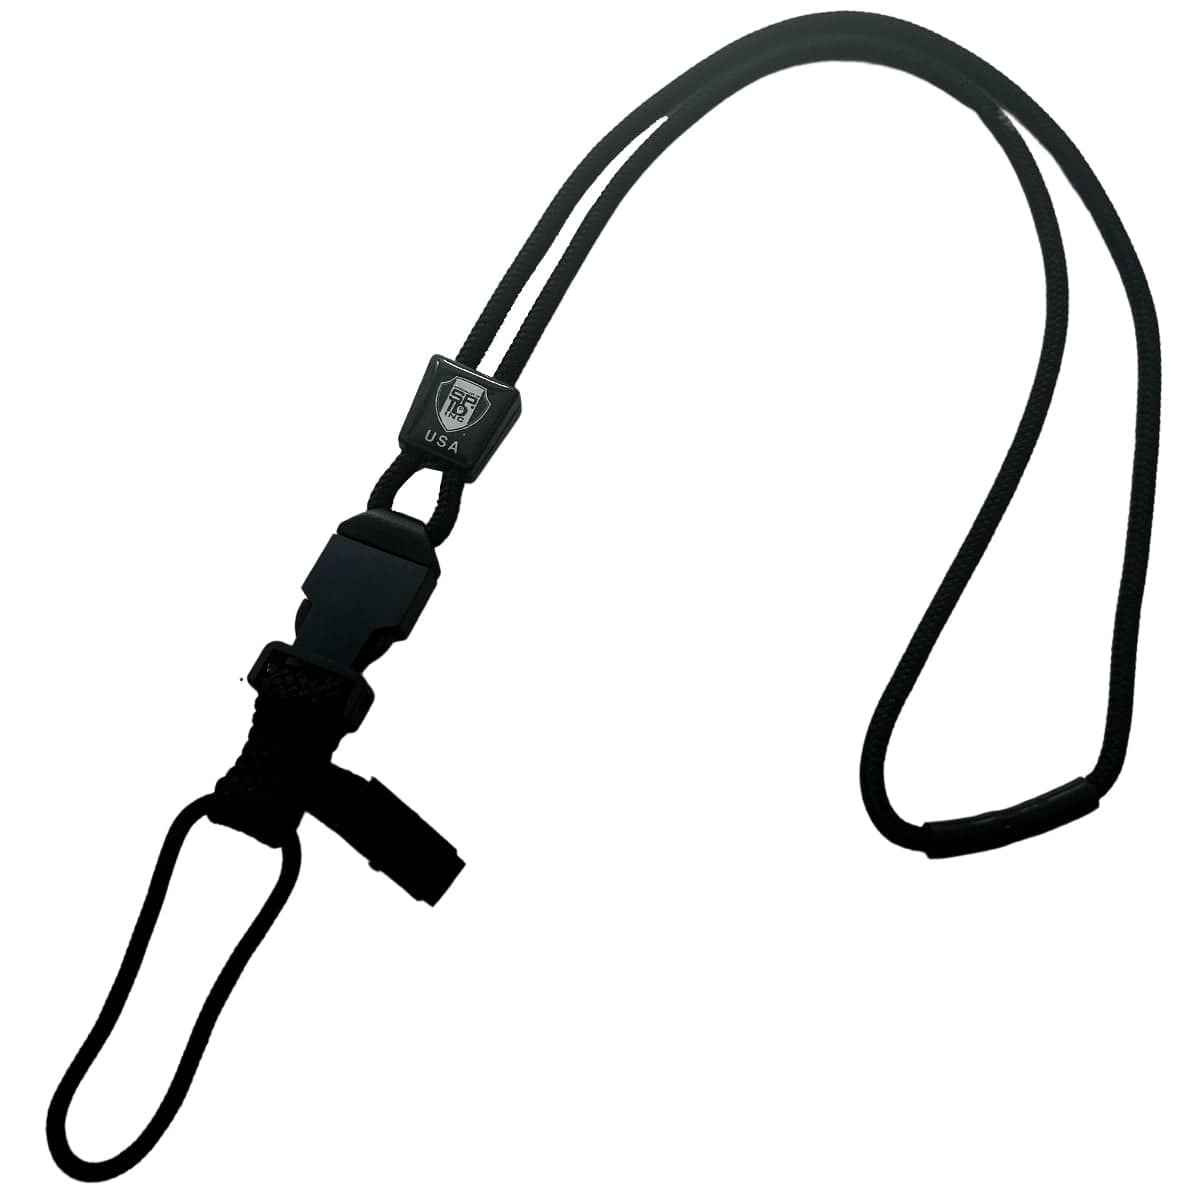 A Black EK Lanyard Plus with Soft End And Fused Clip (10761) by EK USA, with an adjustable breakaway feature, plastic clip, and loop.